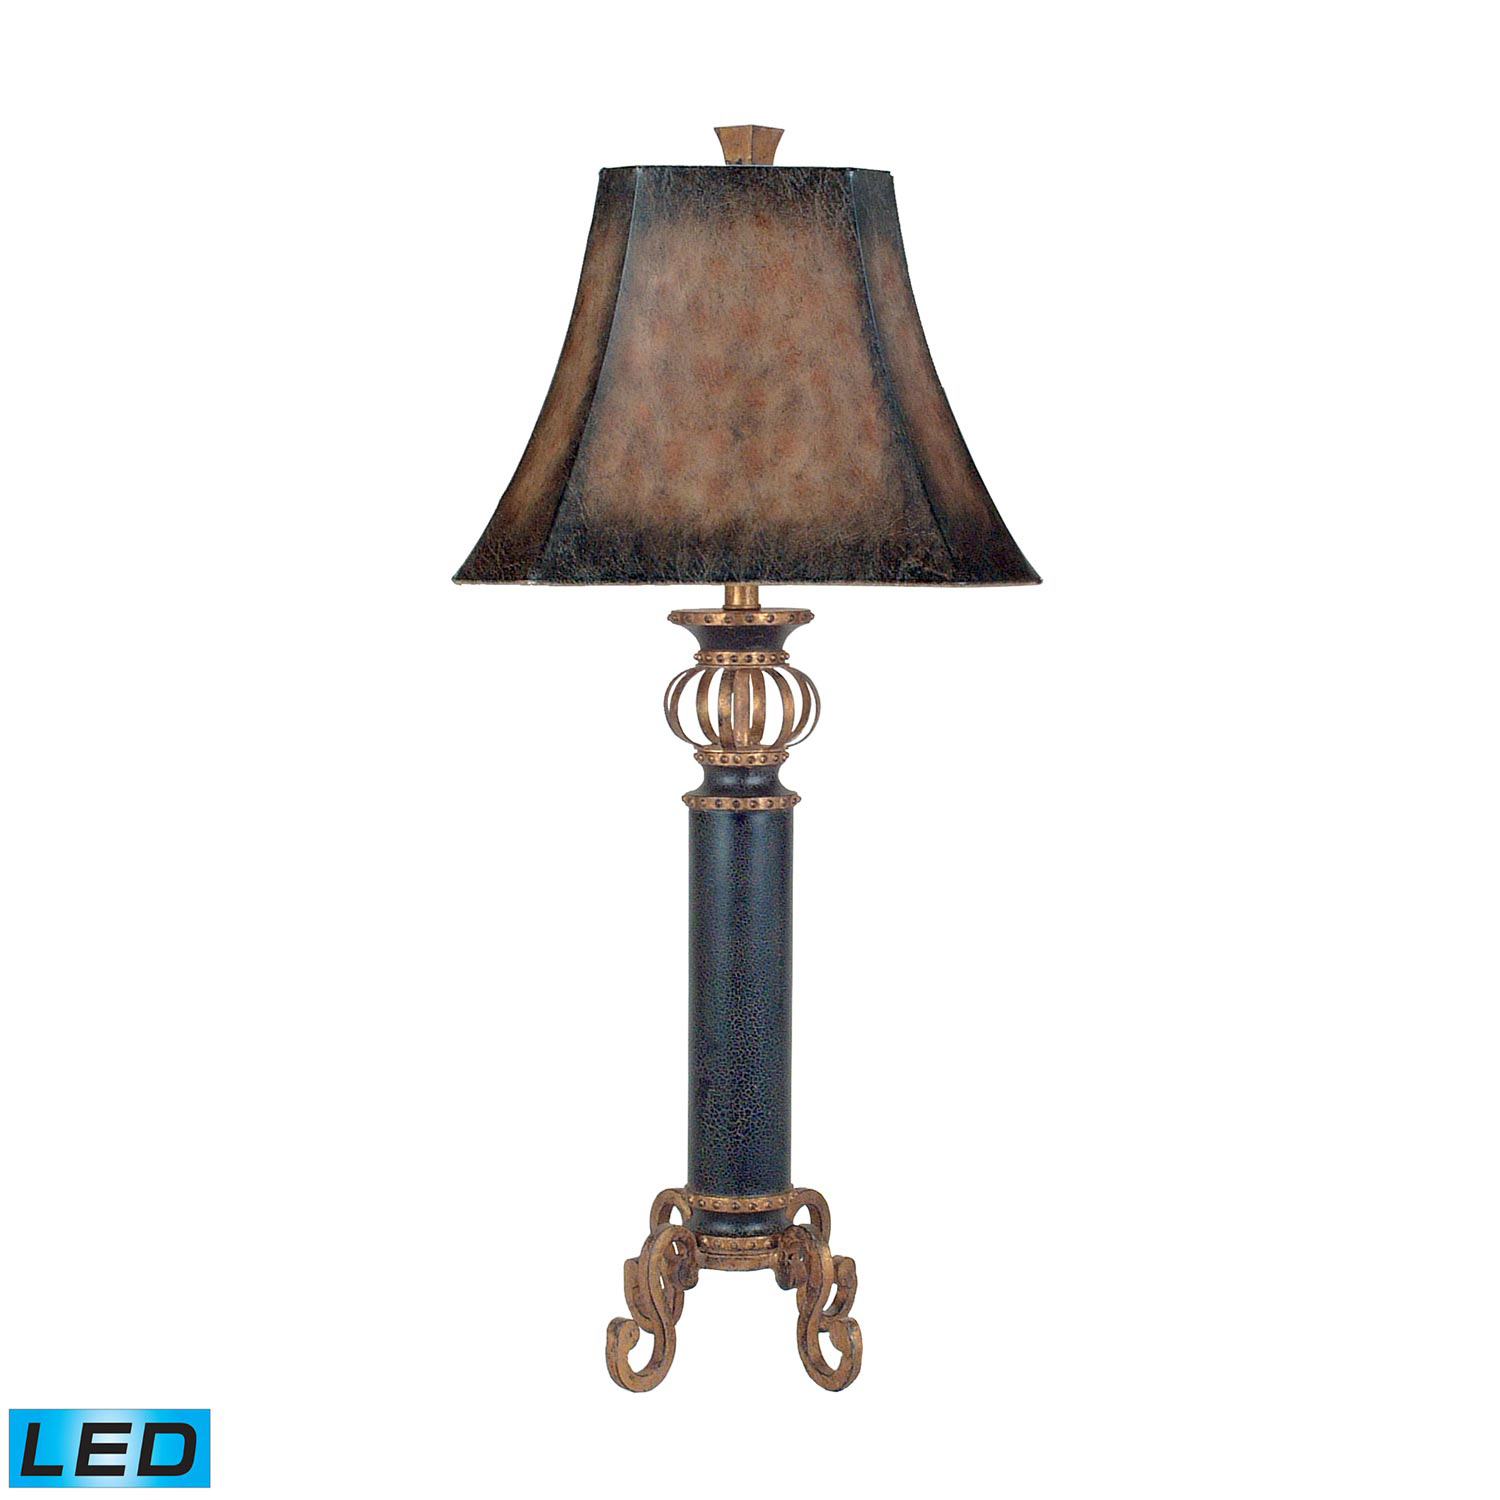 Elk Lighting 96-634-LED Iron Footed Column Table Lamp